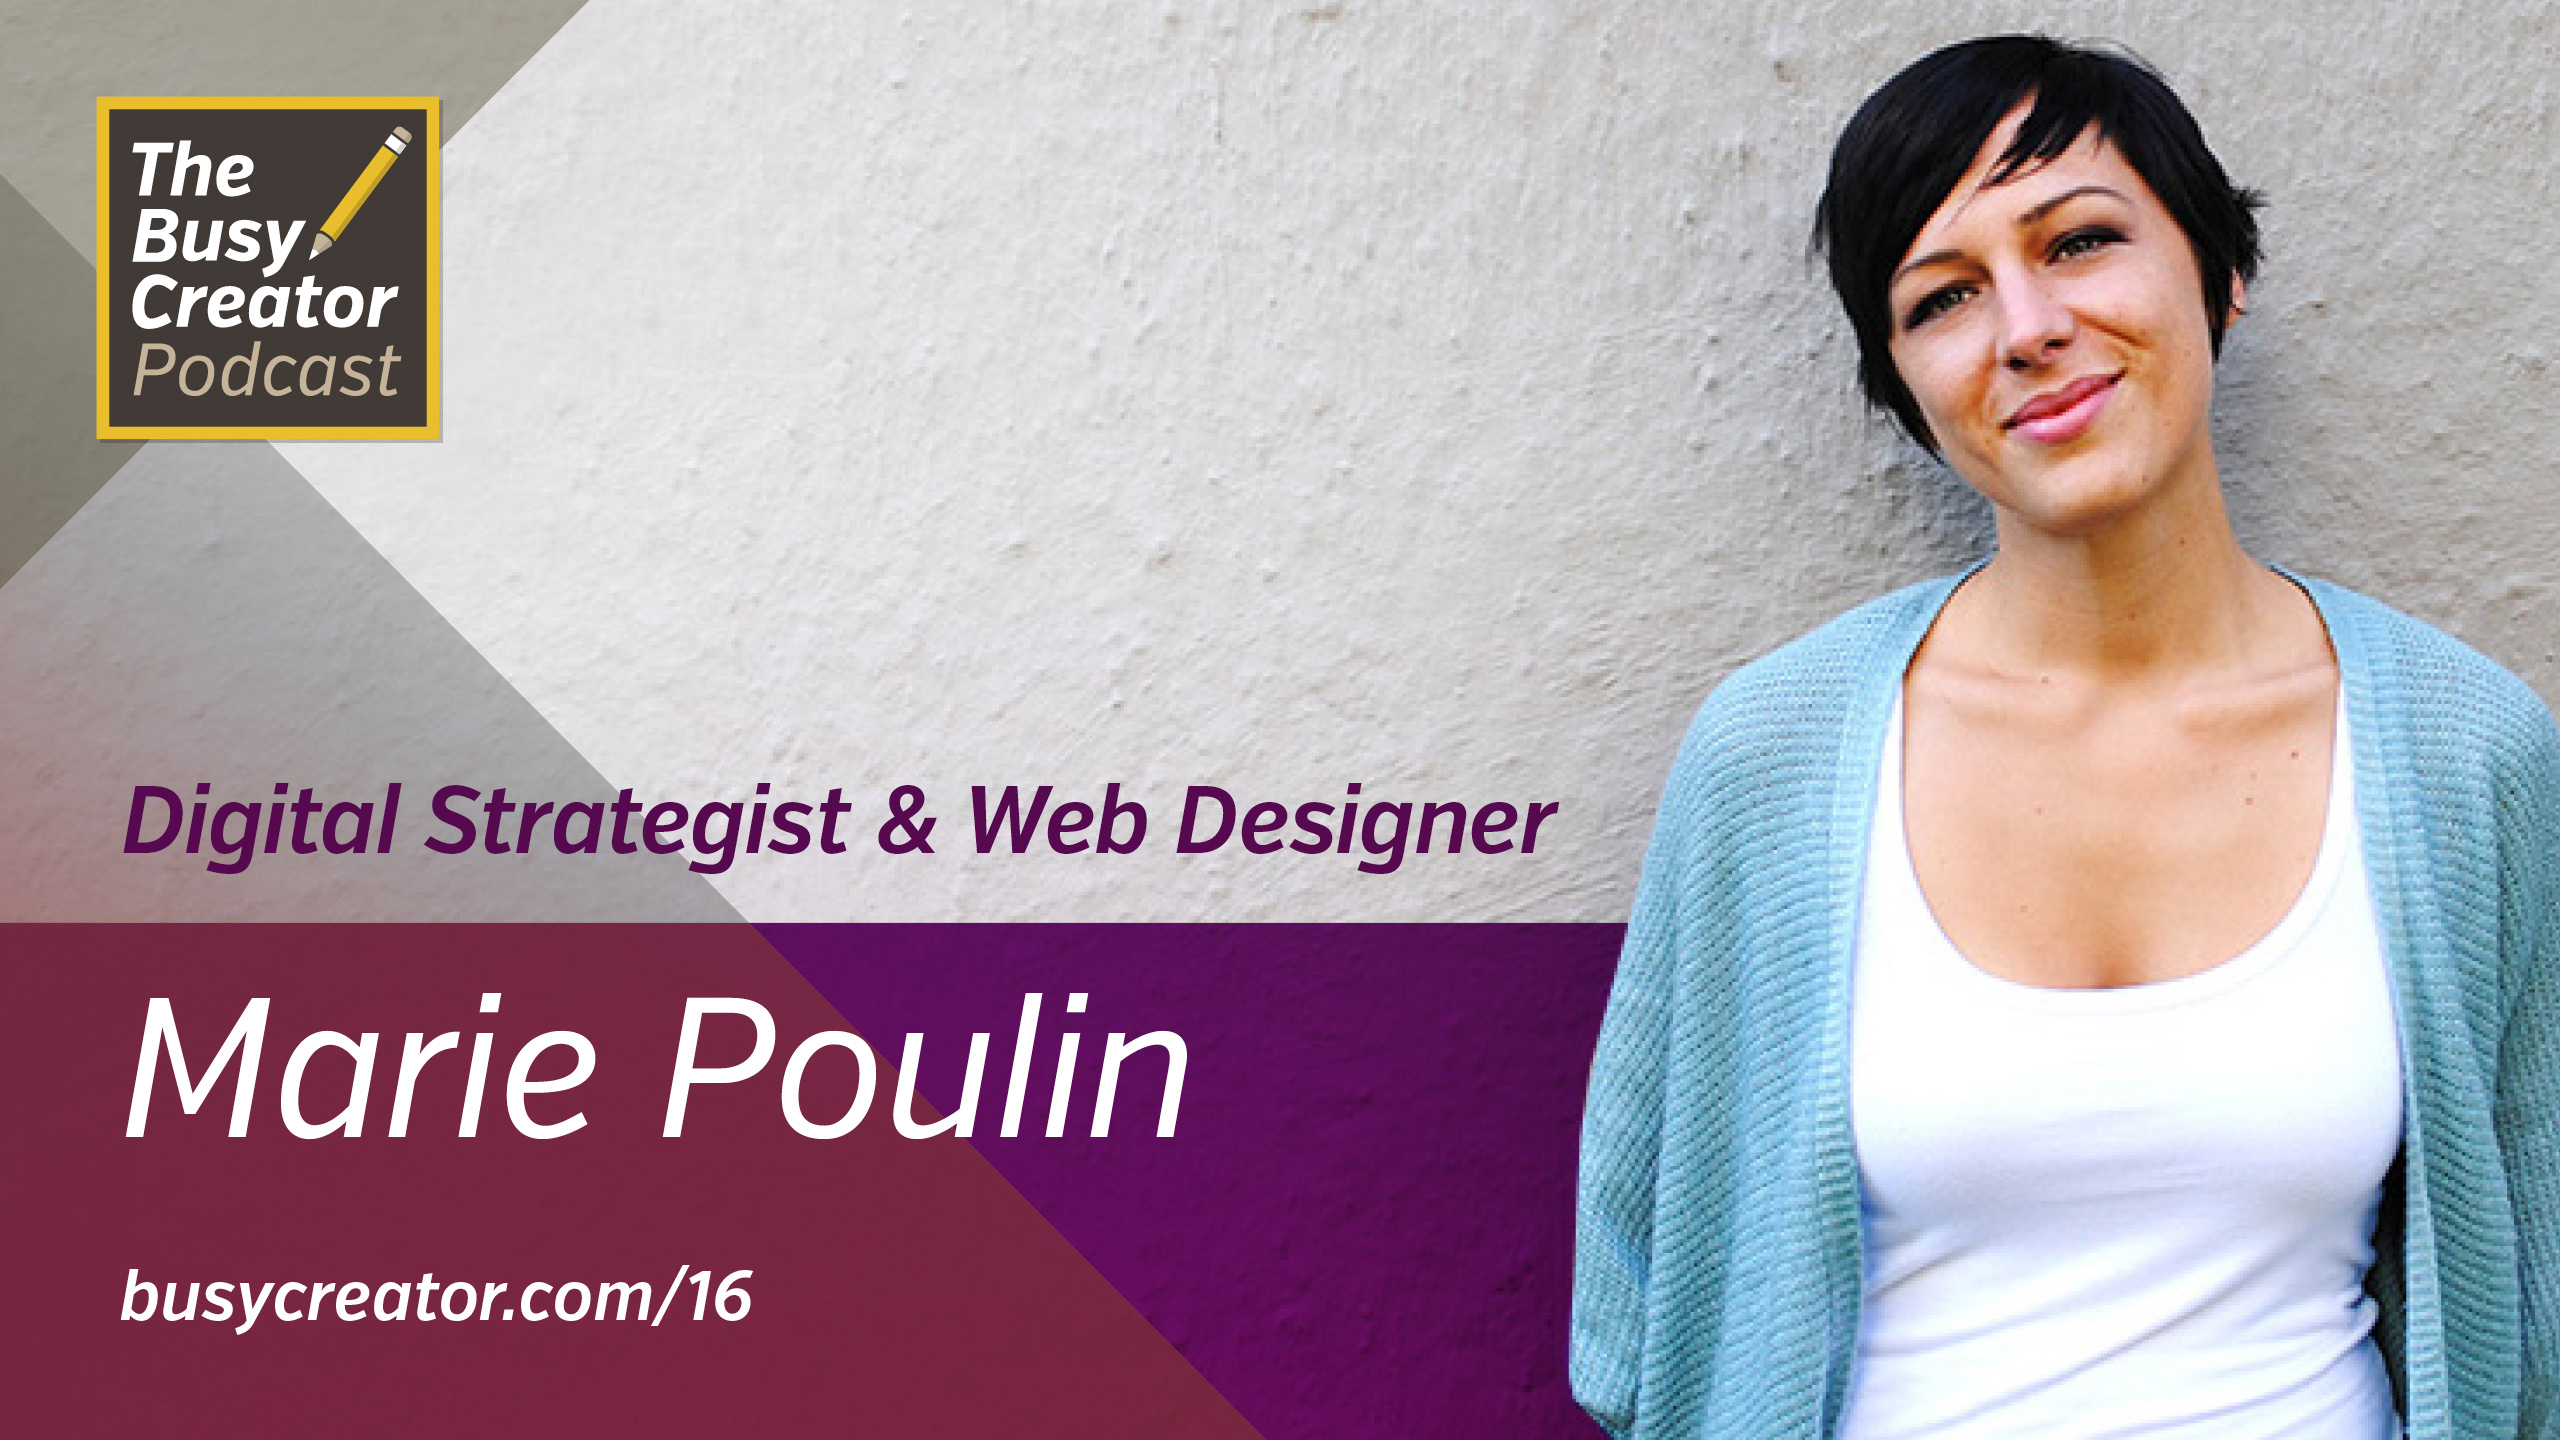 Marie Poulin Describes the Evolution from Designer to Strategist, and her Productivity Habits